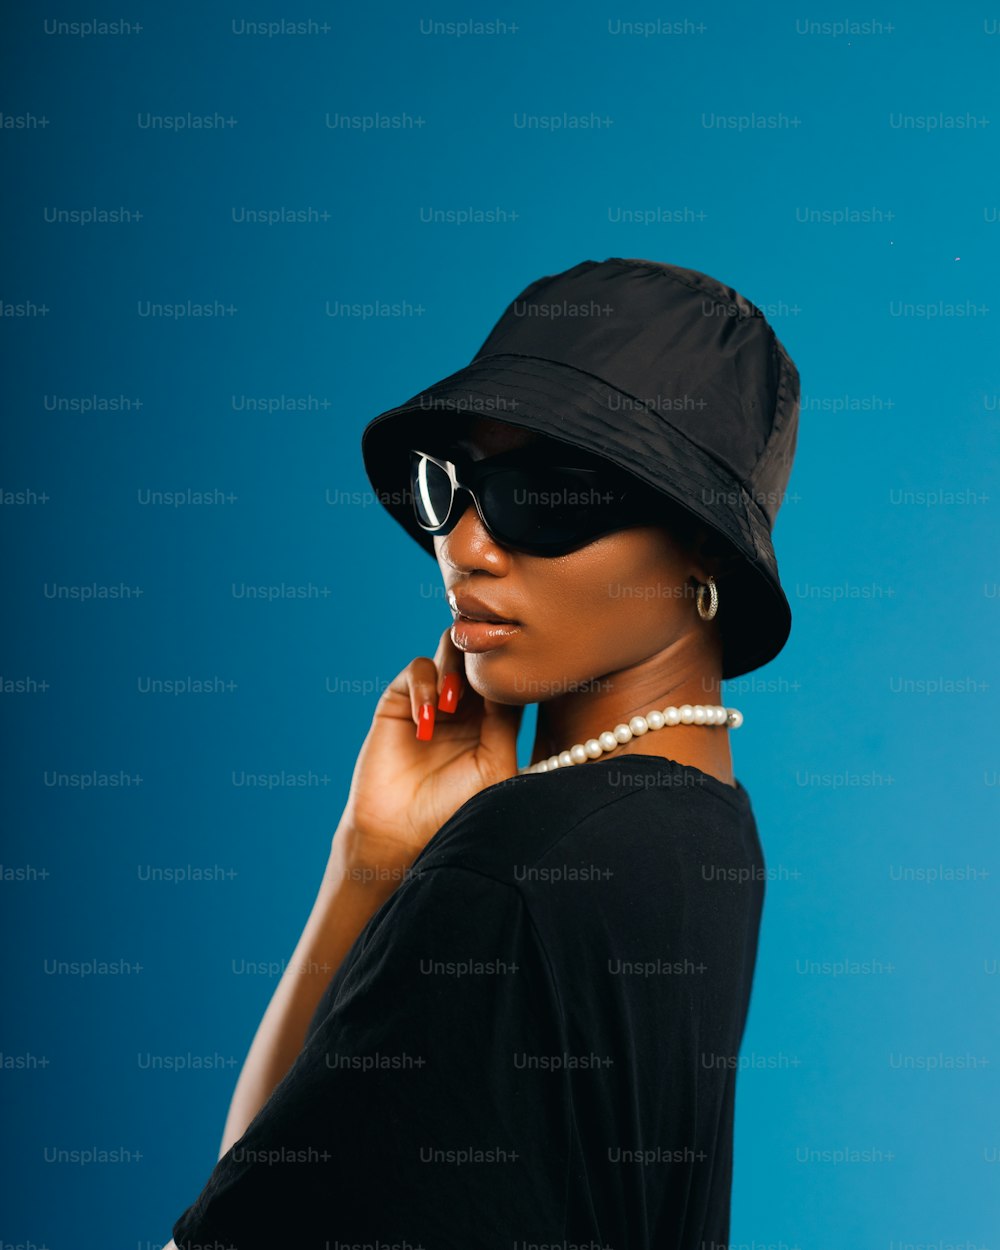 a woman wearing a black hat and sunglasses talking on a cell phone